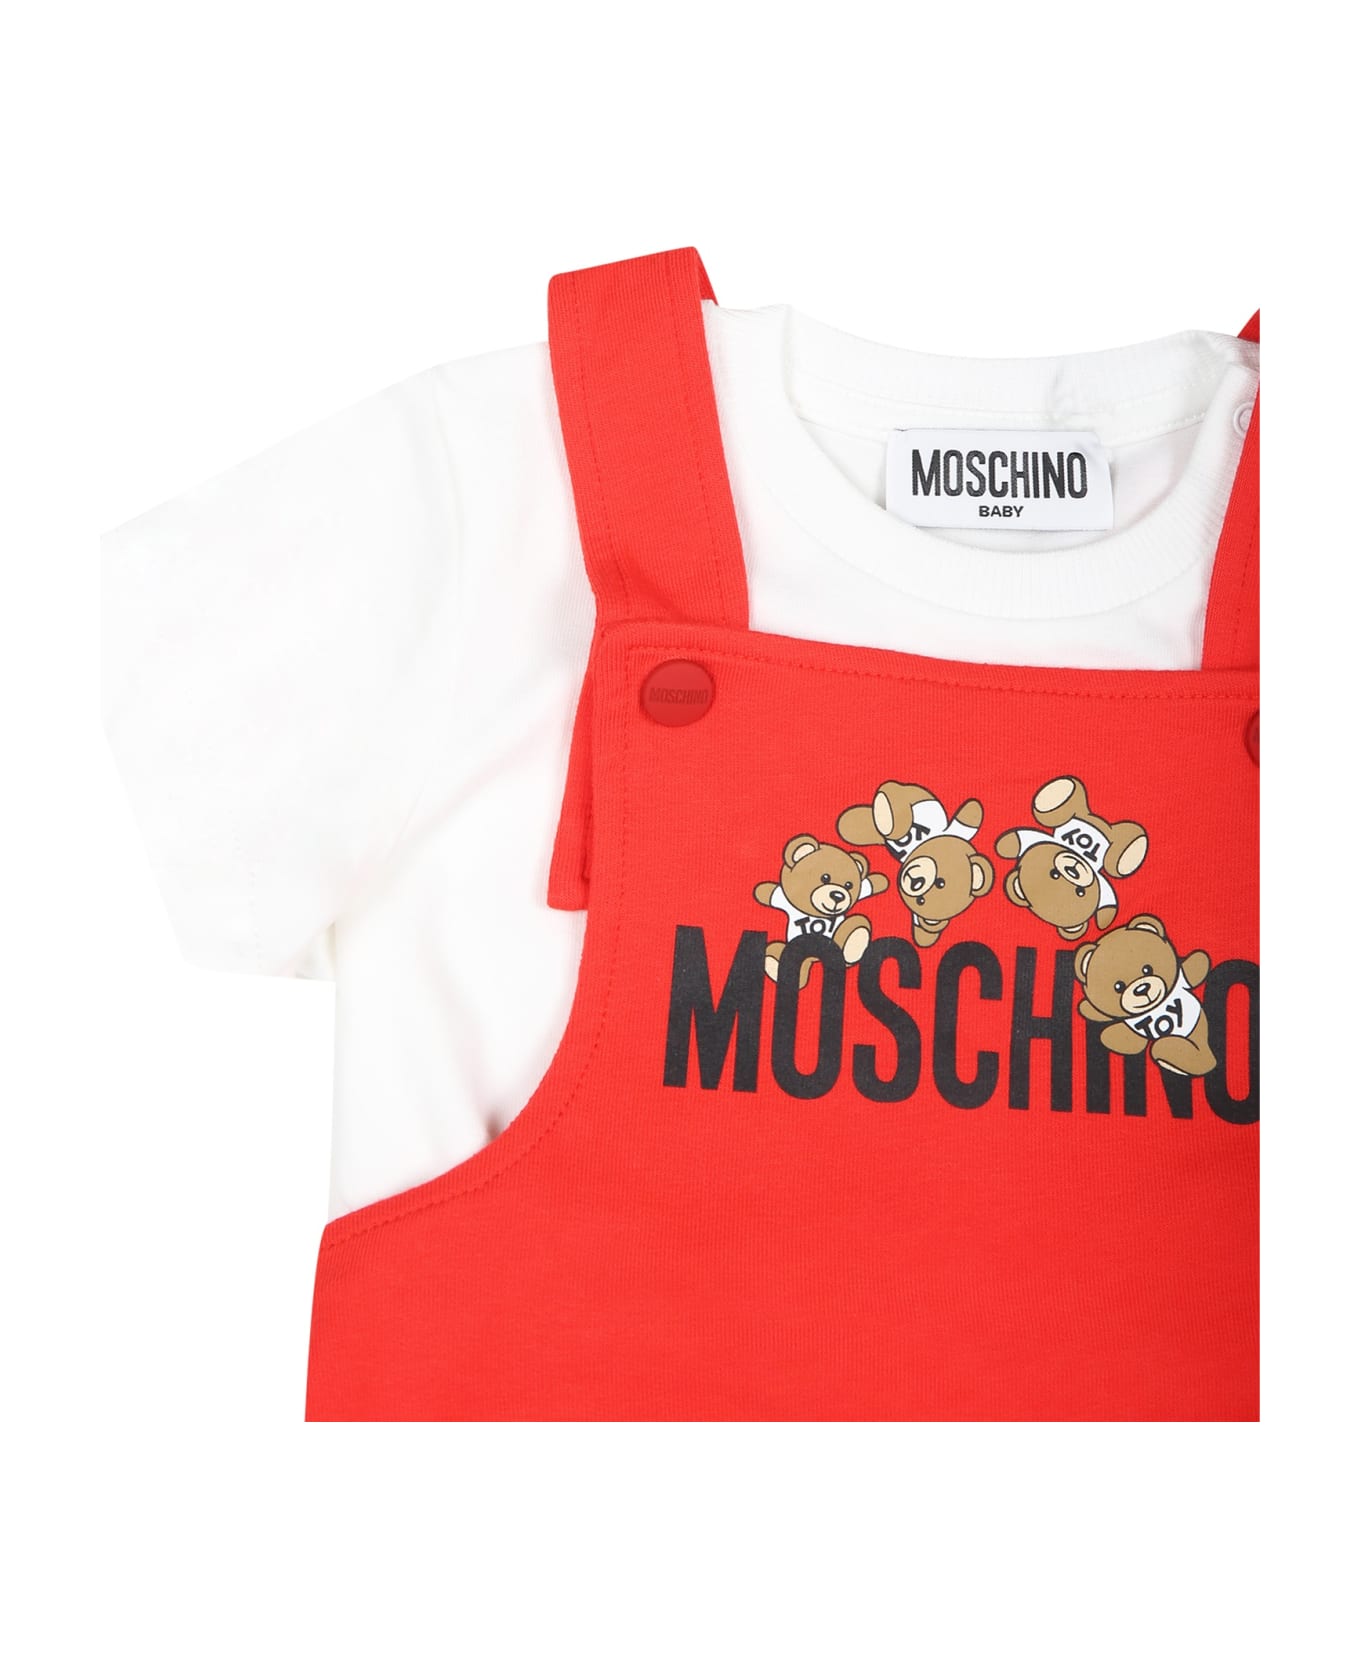 Moschino Red Suit For Baby Boy With Teddy Bears - Red